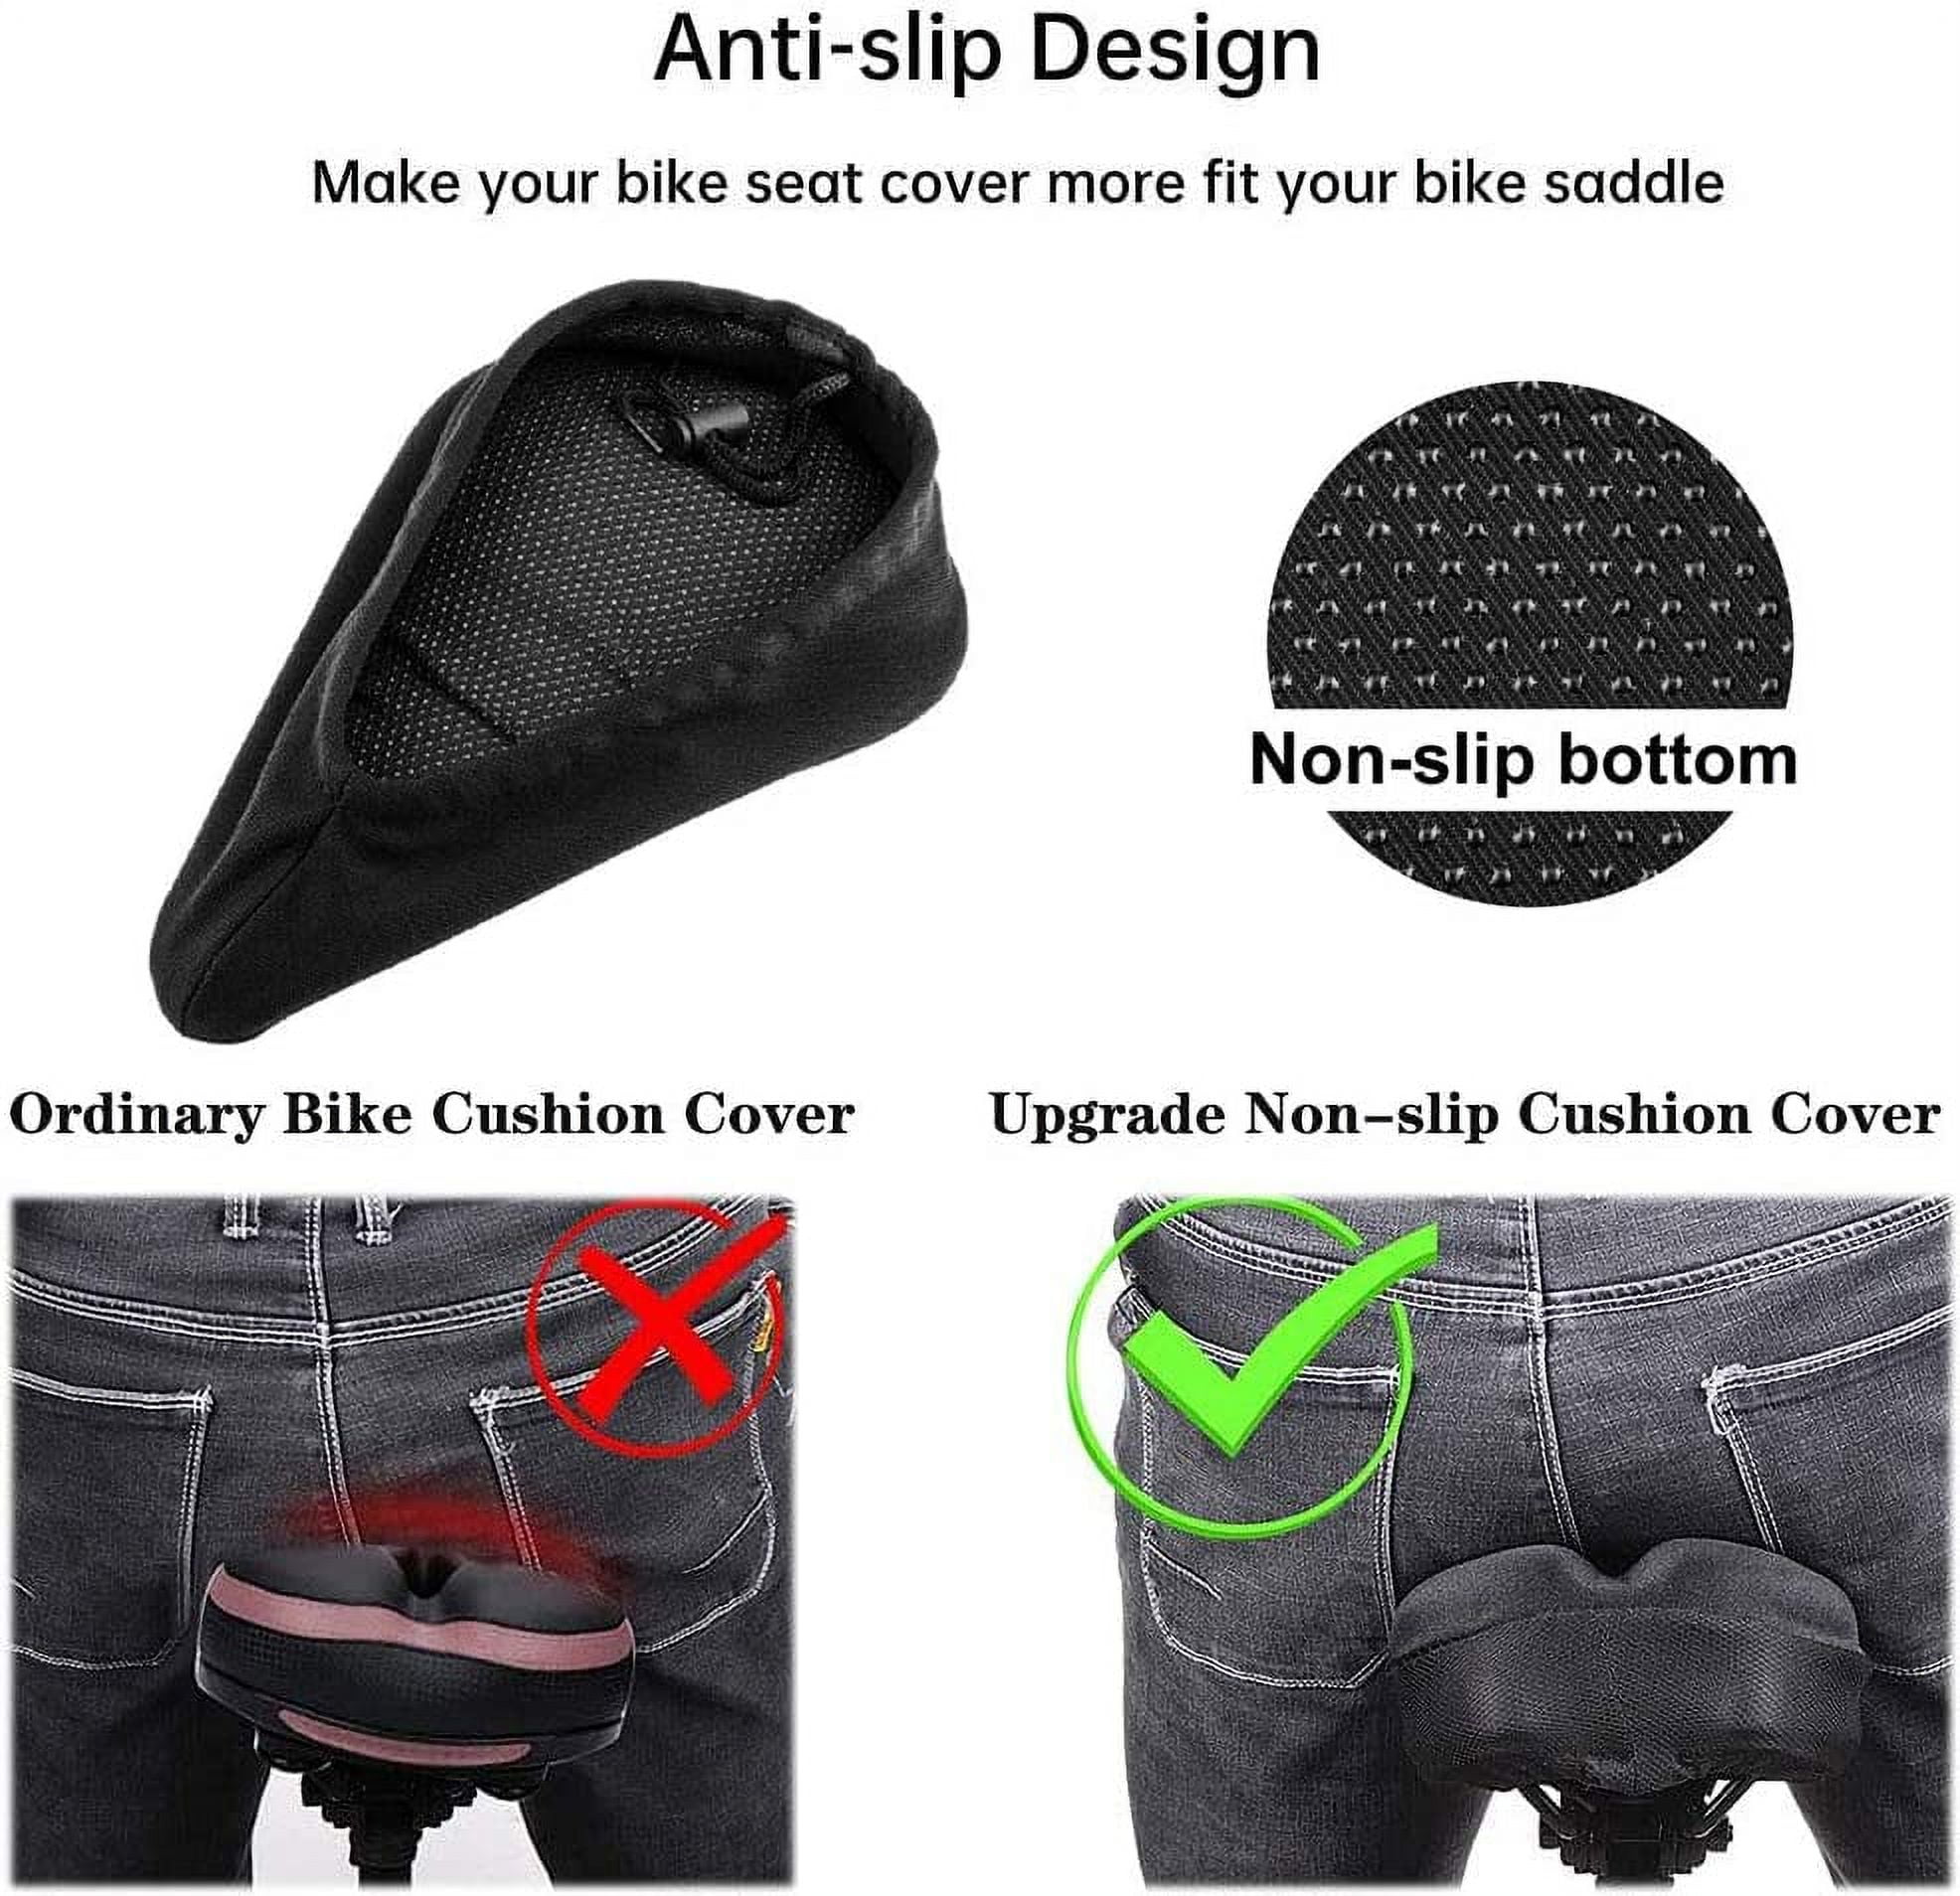 SZMXSS Mountain Bike Seat Cushion Cover, Extra Soft Gel Bicycle Seat Cover for Peloton, Soft Silicone Padded Bike Saddle Cover, Upgraded Bicycle Seat Cushion